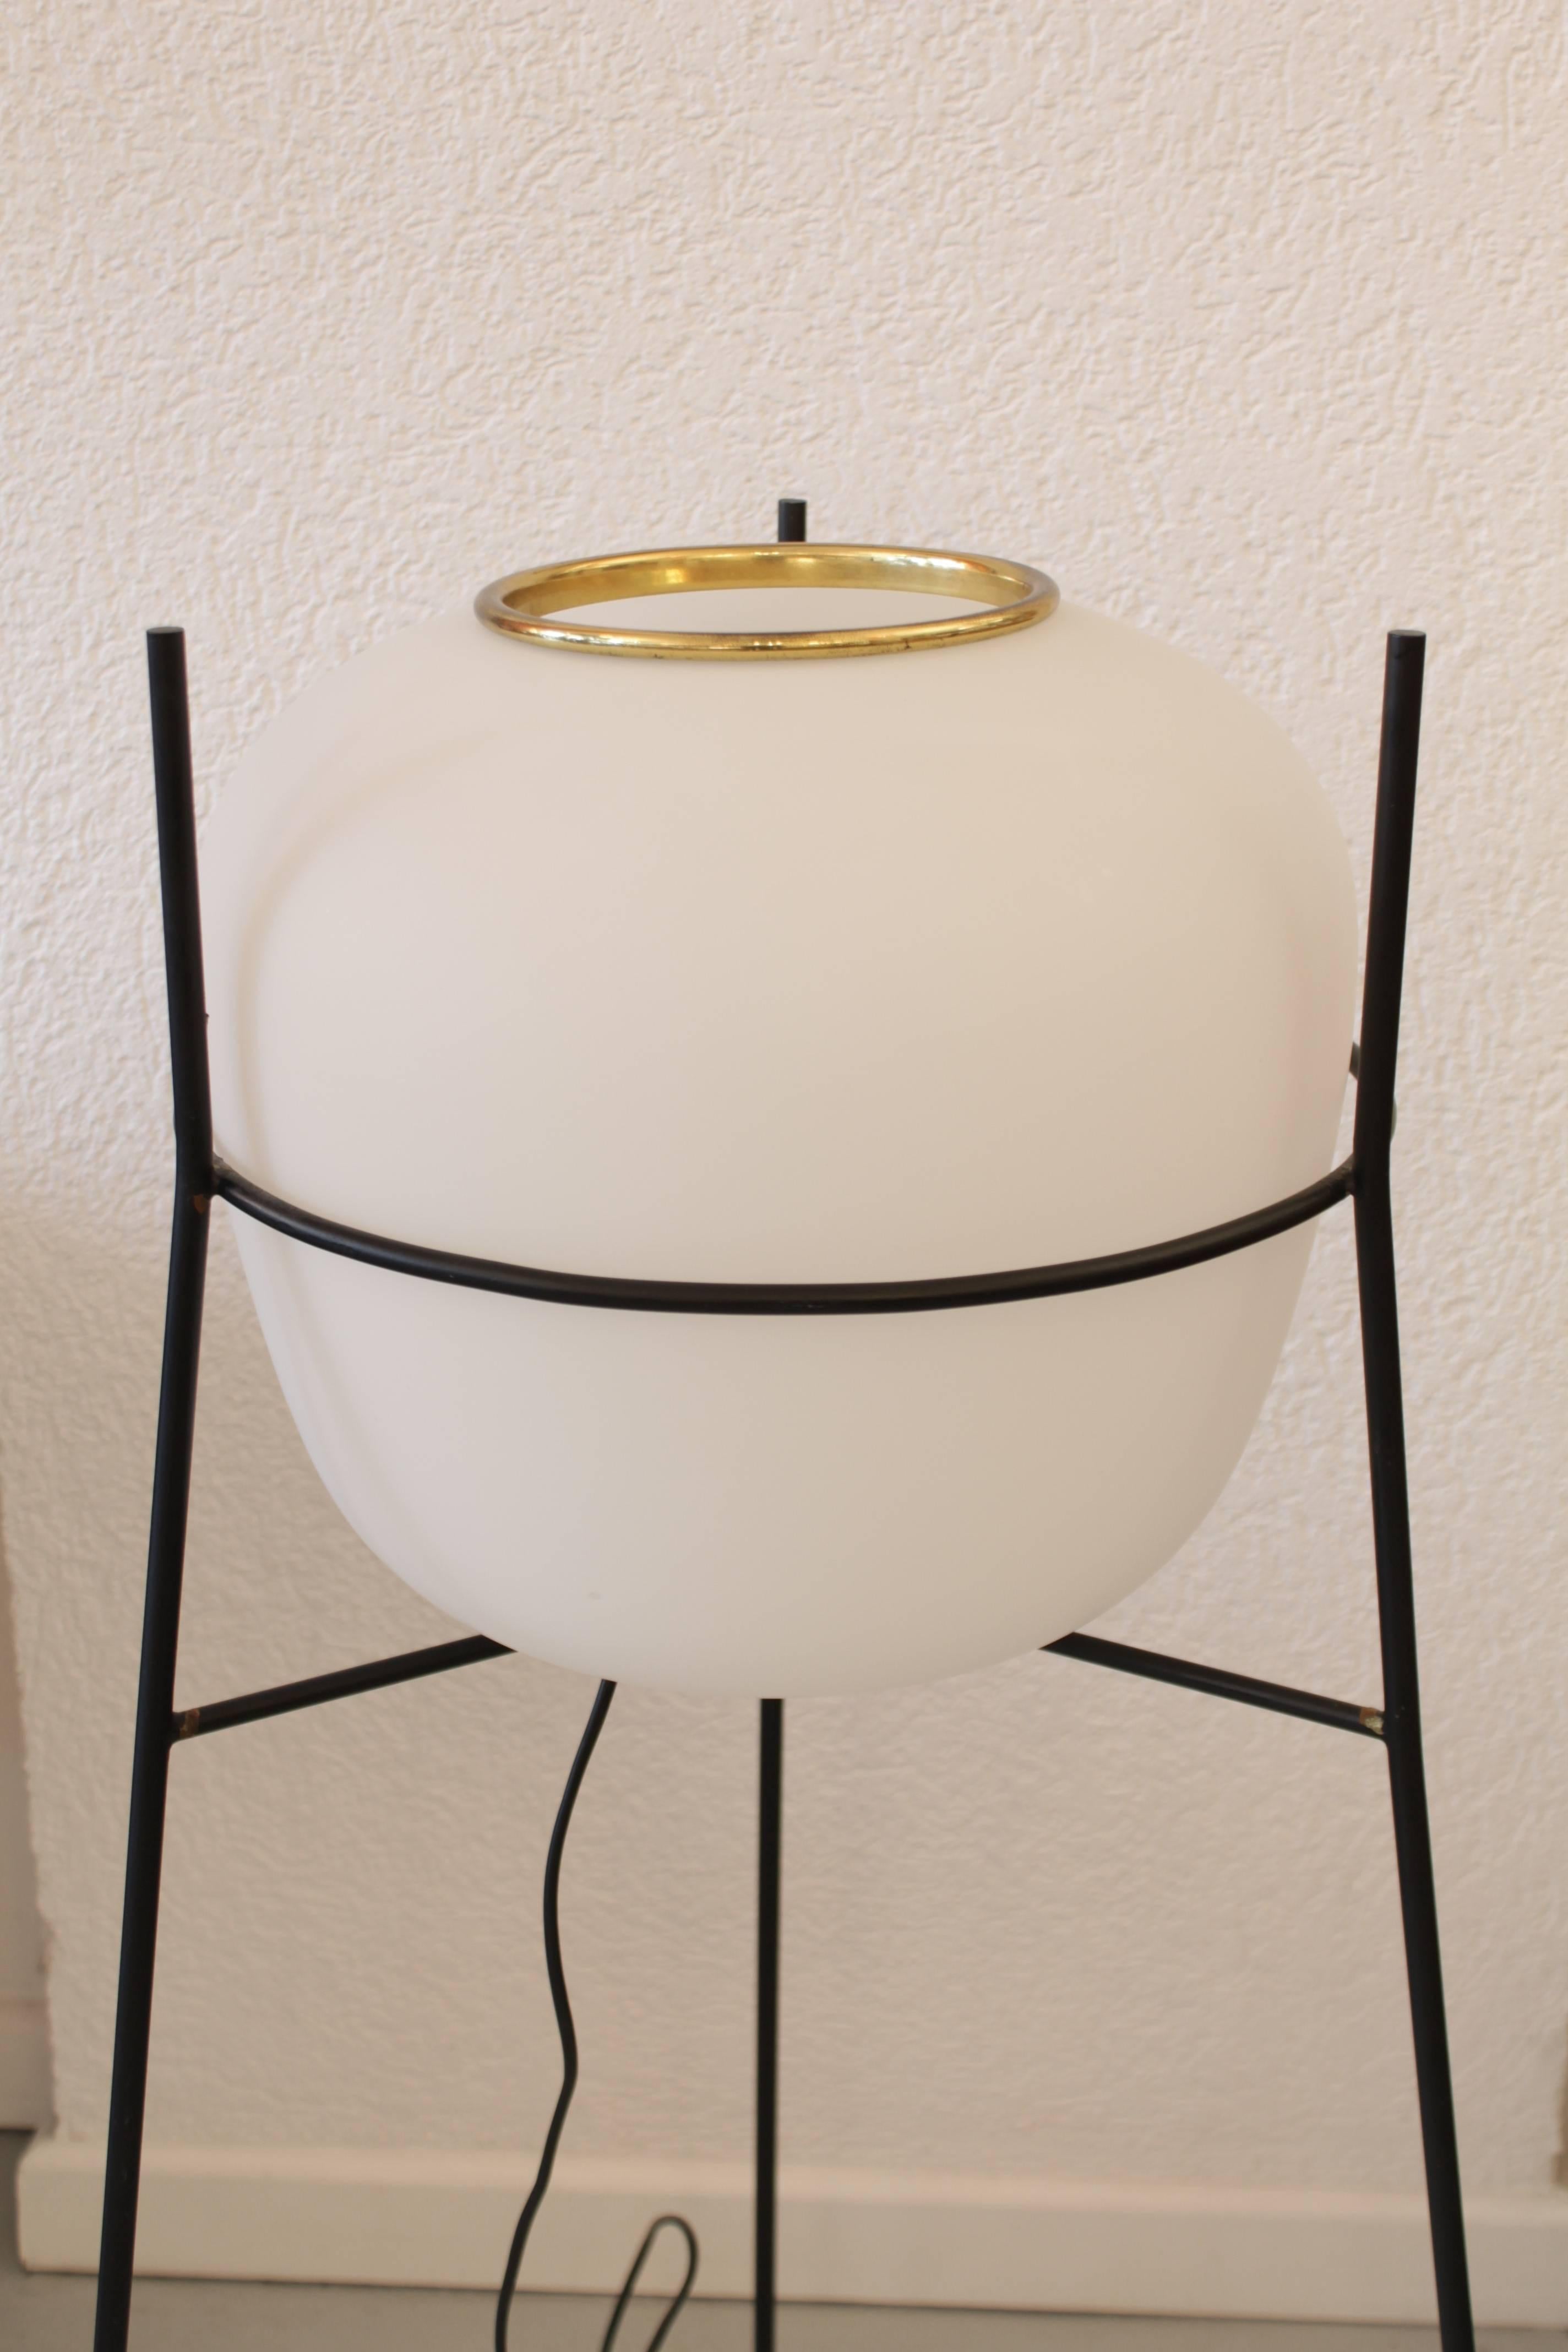 Steel, brass and glass floor lamp produced by Stilnovo, Italy, circa 1950s
Perfect condition, all original, brass glides and switch, manufacturer label on the sucket.
White satin glass.